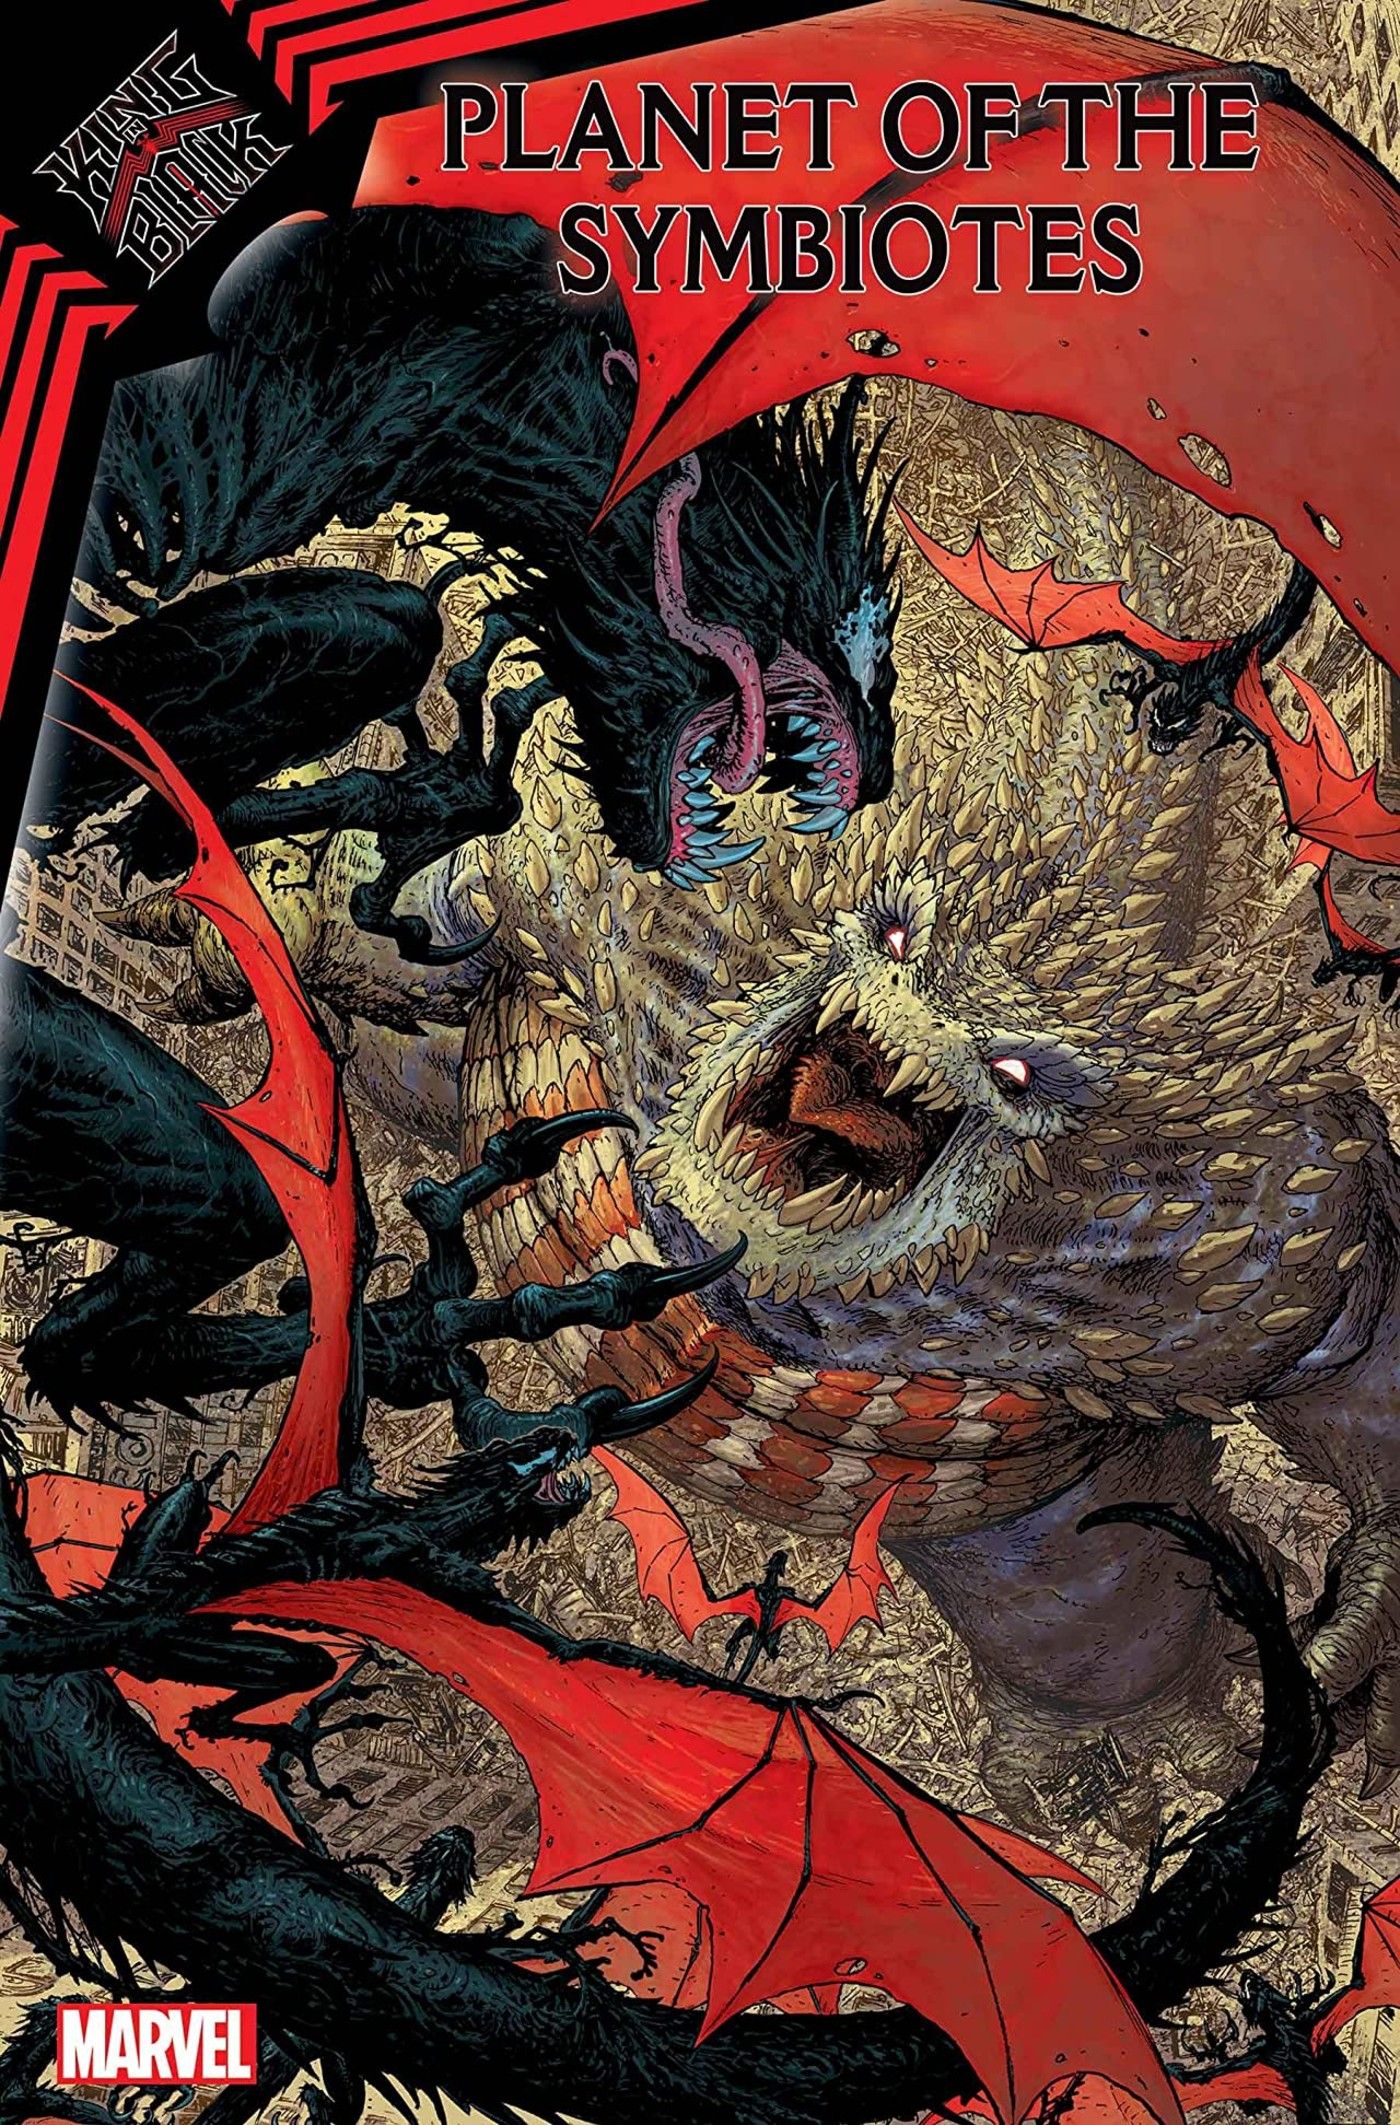 Planet of the Symbiotes #2